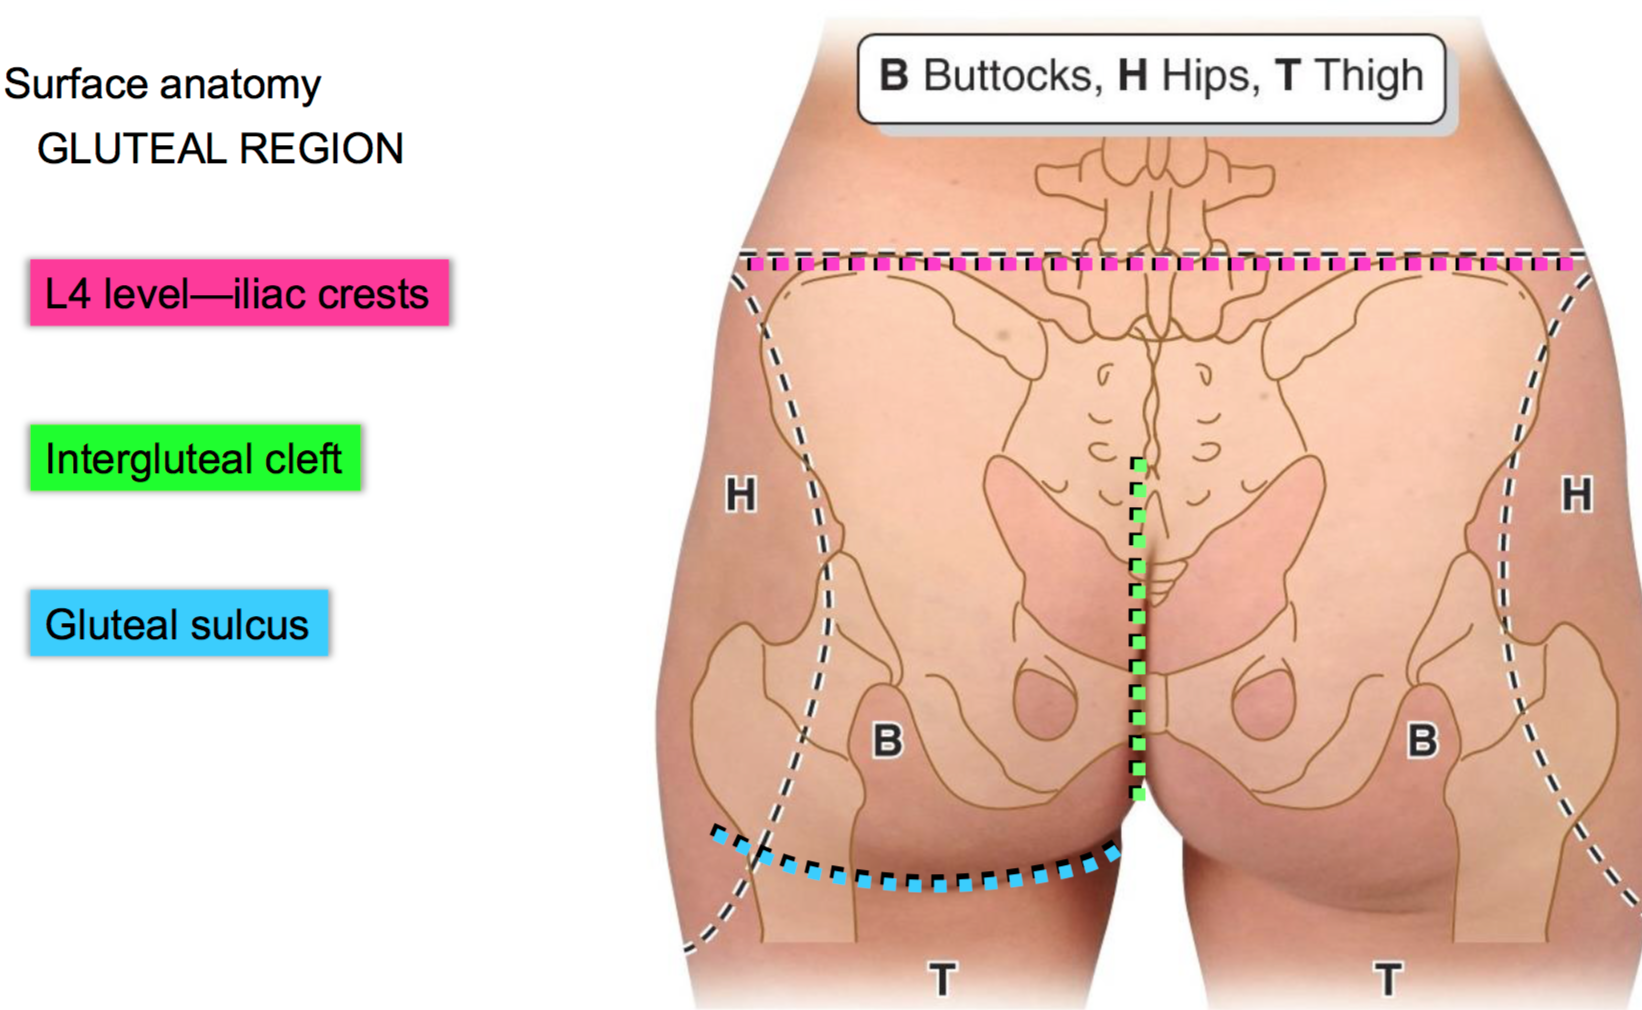 Extents of gluteal region
iliac crest, intergluteal cleft, gluteal sulcus